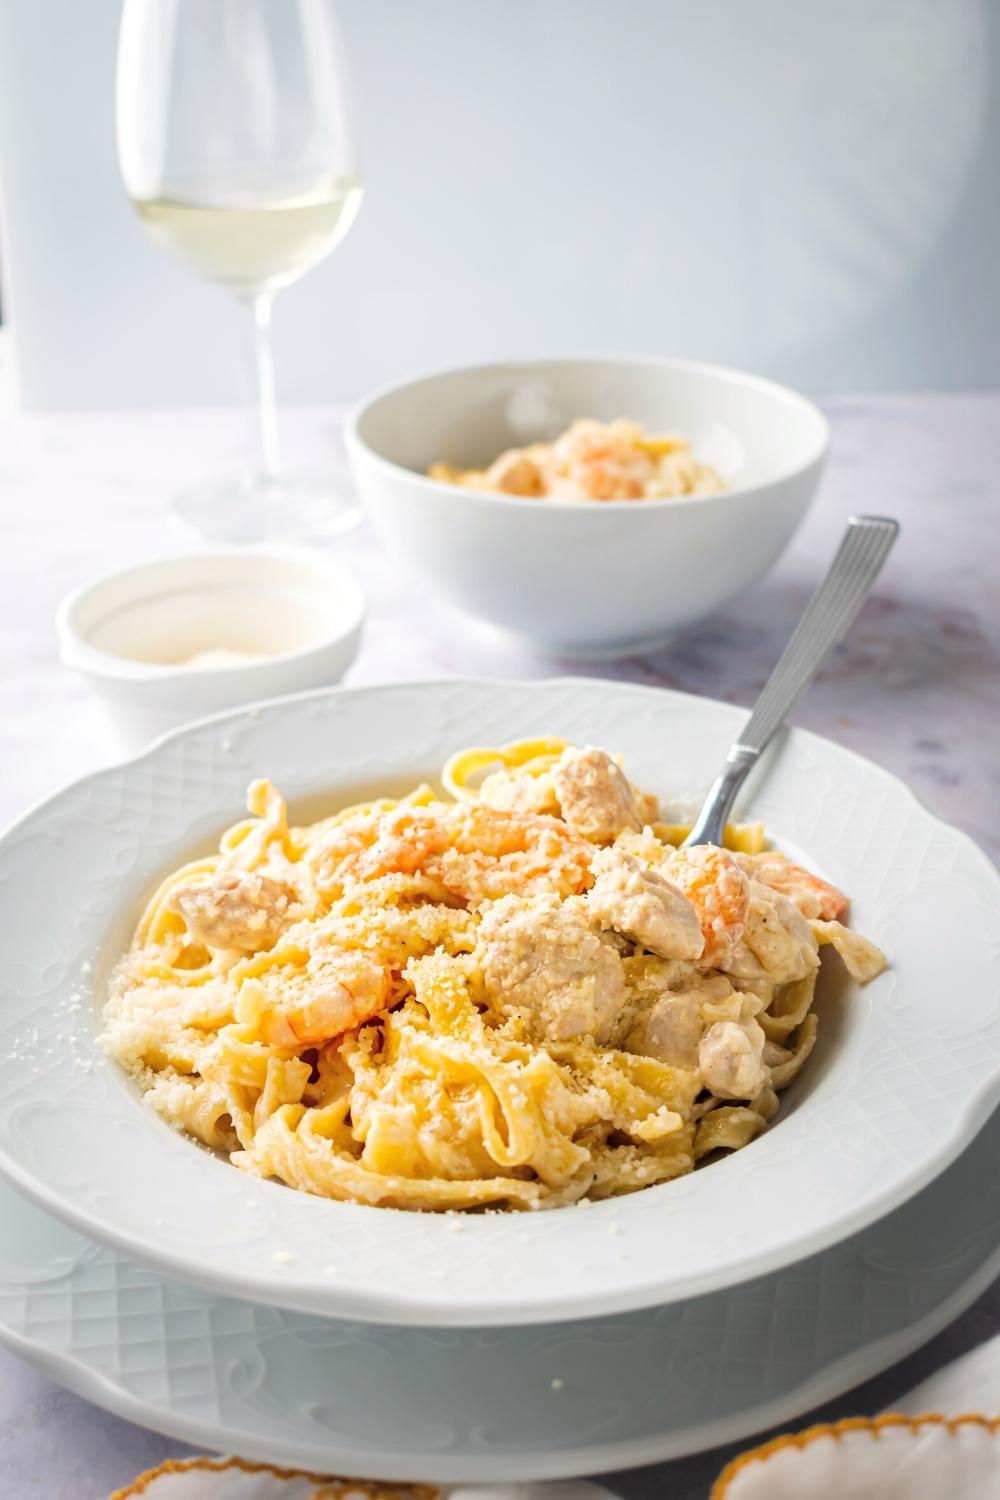 Chicken and shrimp Alfredo in a white bowl with a spoon submerged in it. Behind it as a bowl Parmesan cheese a bowl of the chicken and shrimp Alfredo and a glass of wine.